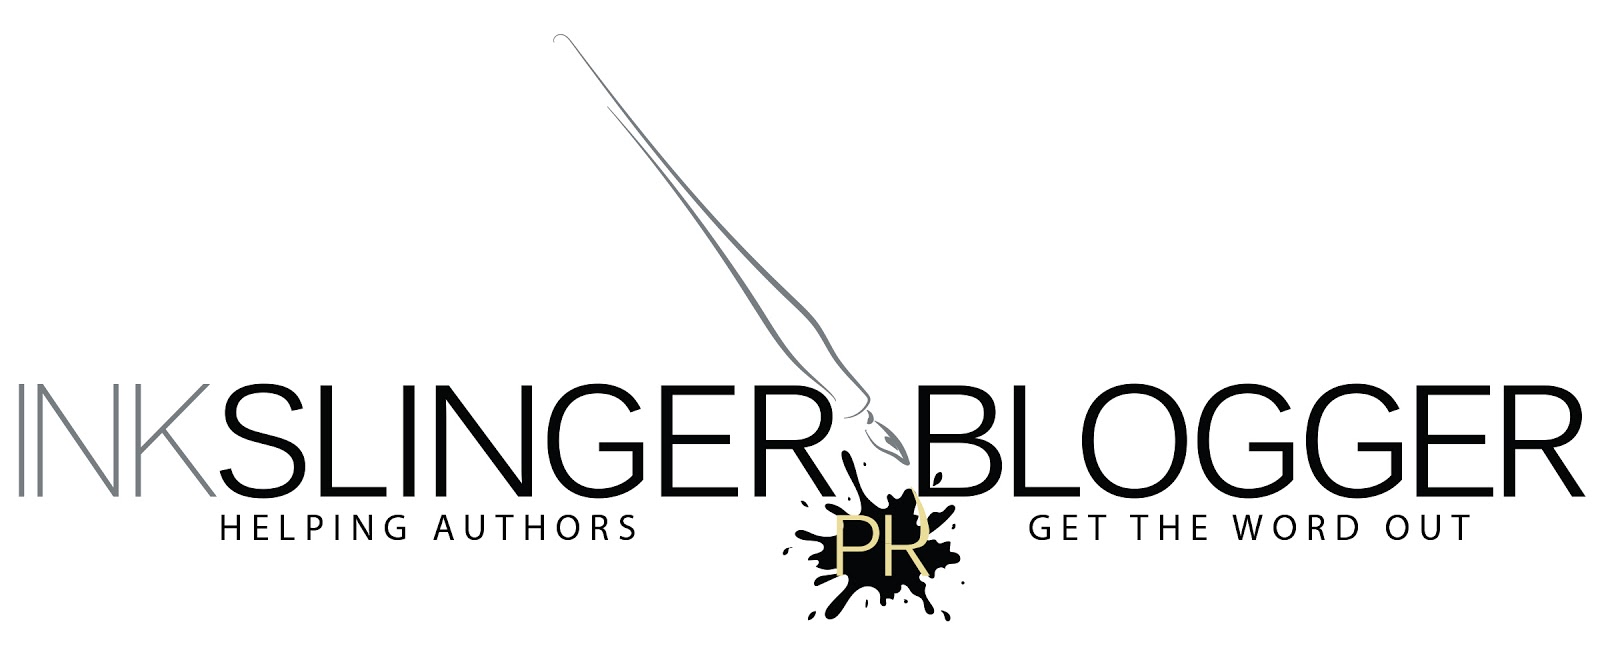 What I M Reading Inkslinger Pr Review Excerpt